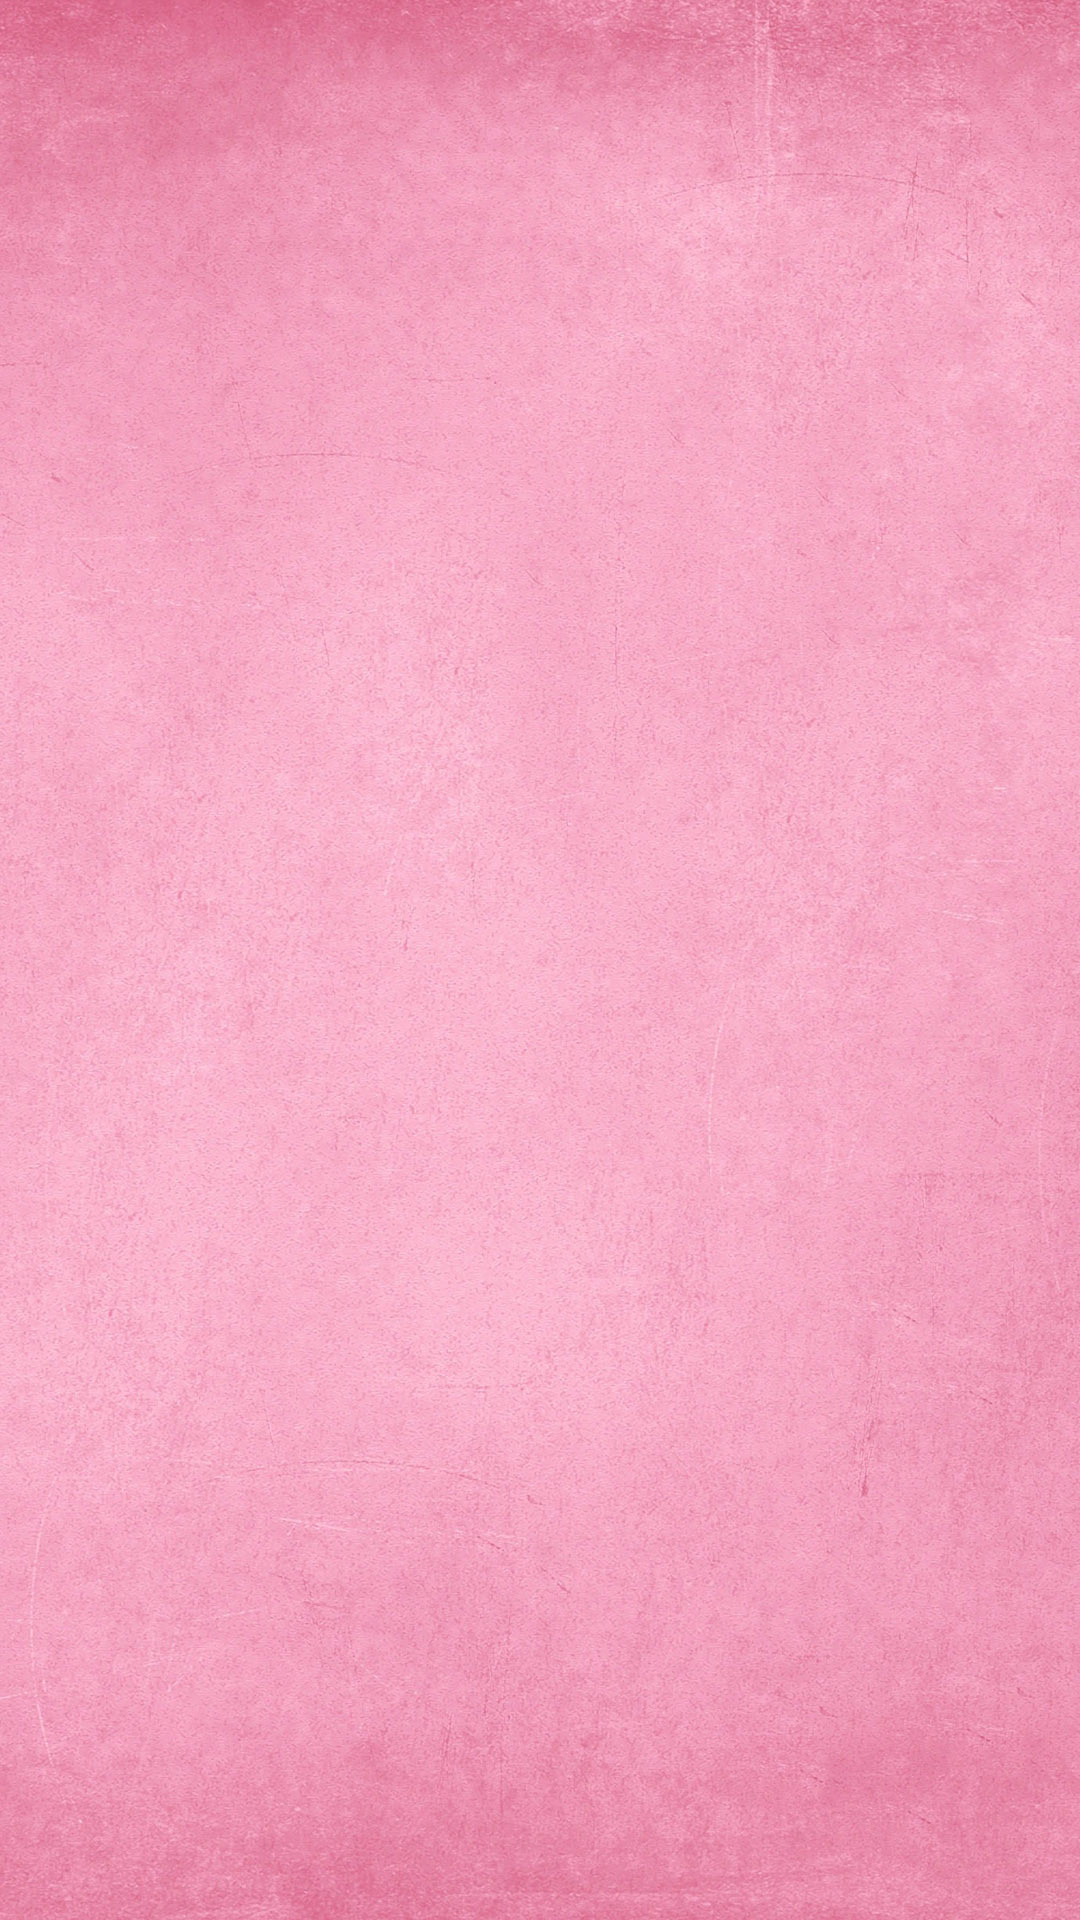 Texture Mobile Wallpapers Pink Abstract Wallpaper - Cool Pink Background Iphone - HD Wallpaper 